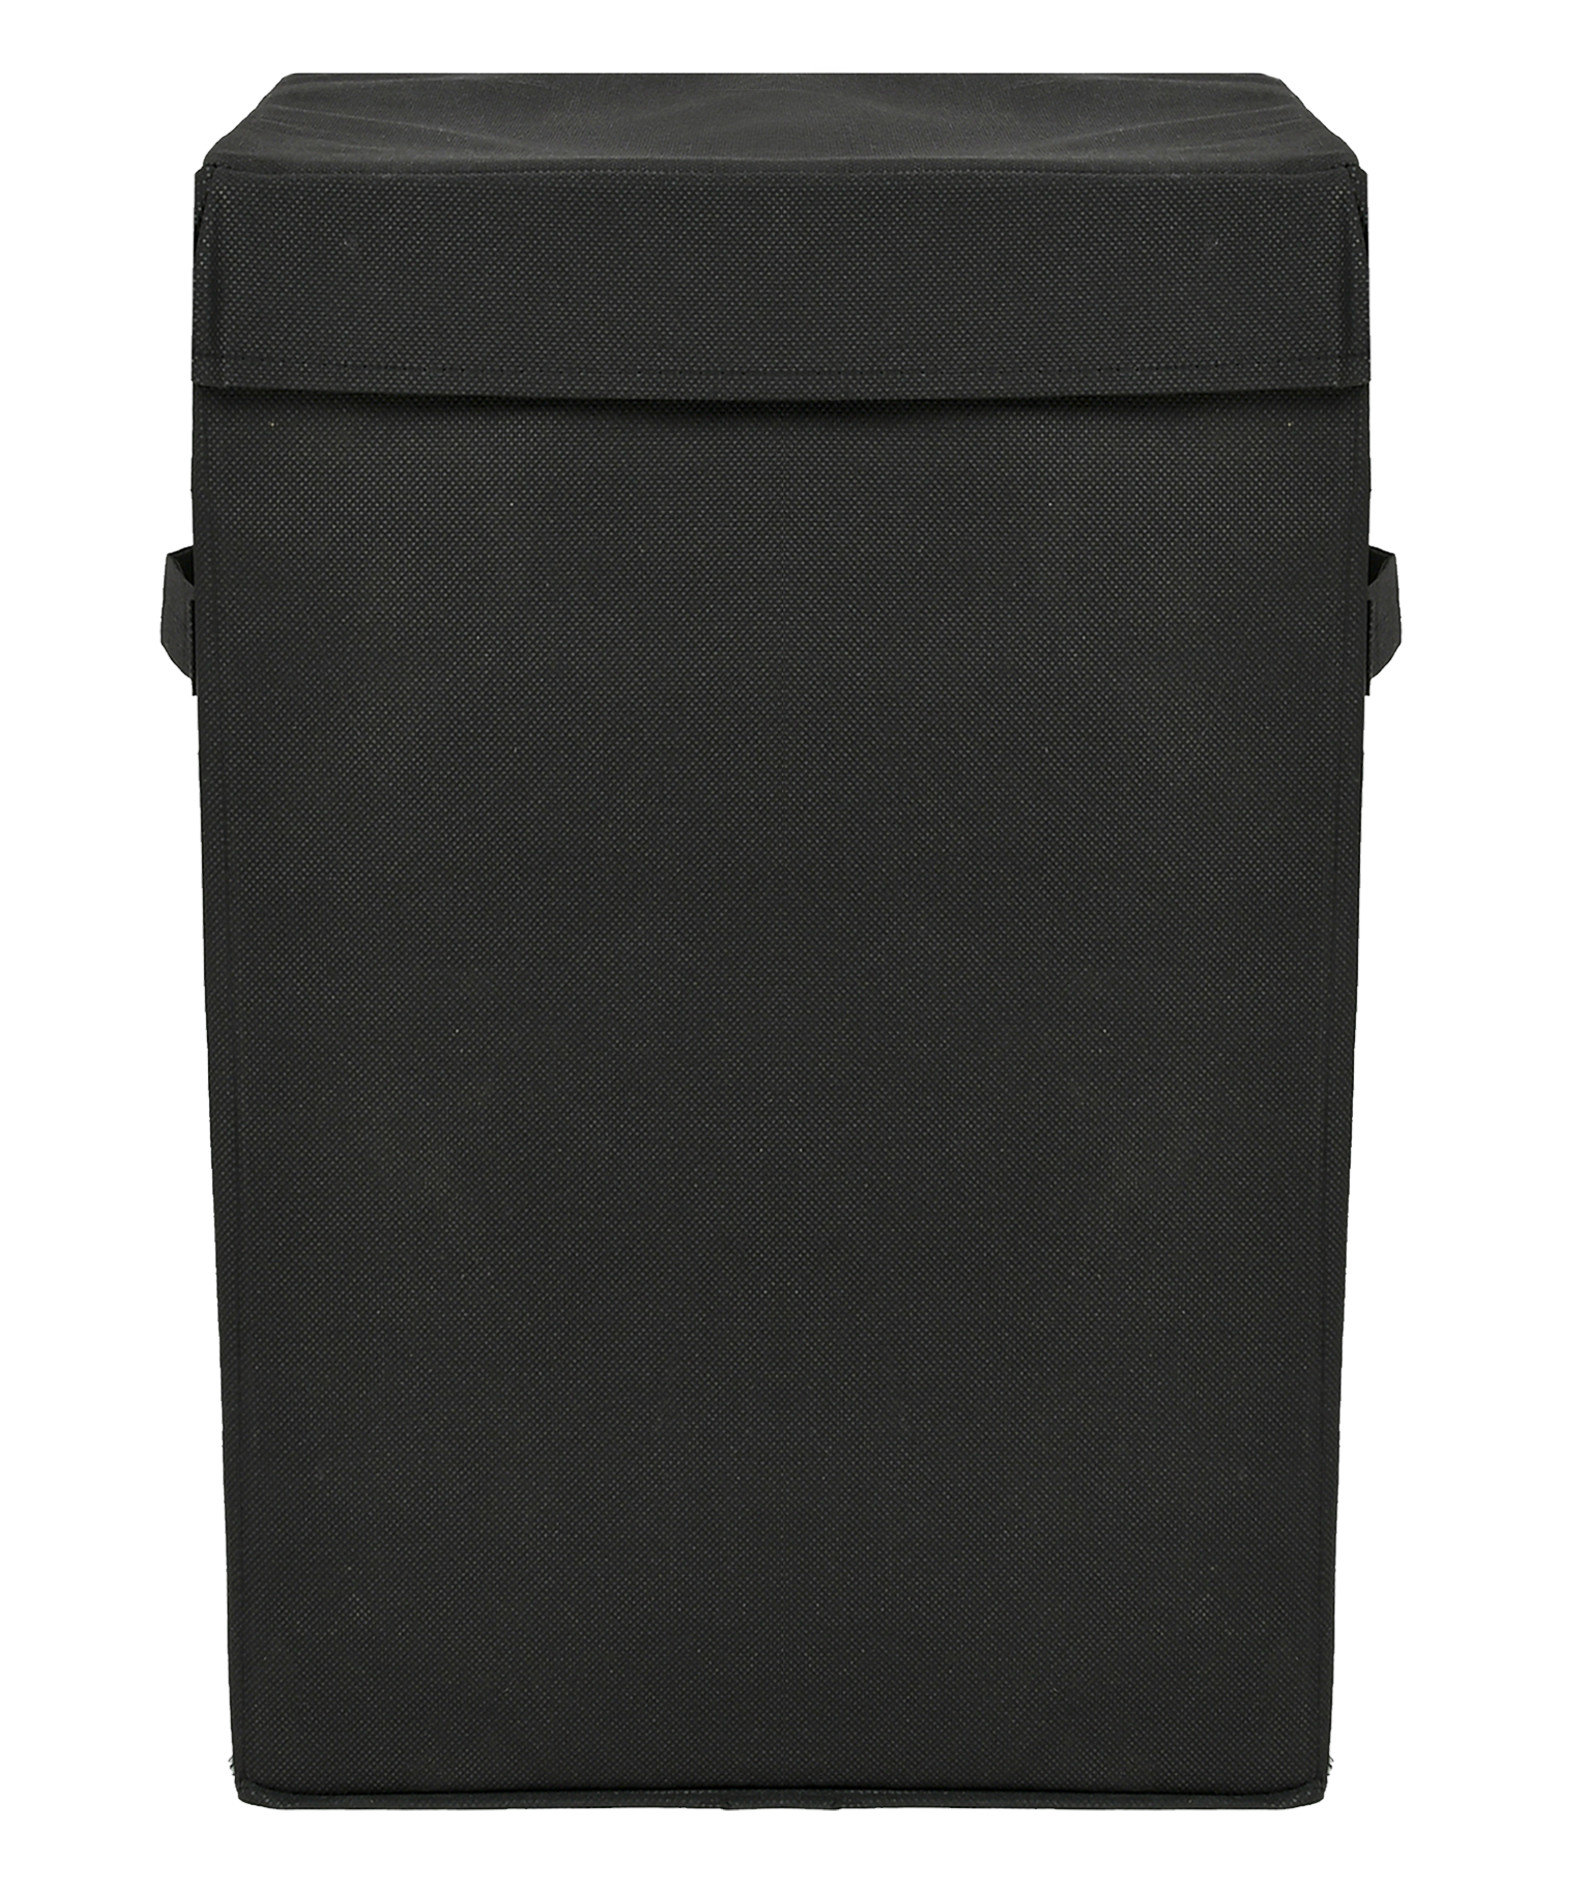 Kuber Industries Non-Woven Foldable Large Laundry basket/Hamper With Lid & Handles (Black)-44KM0189